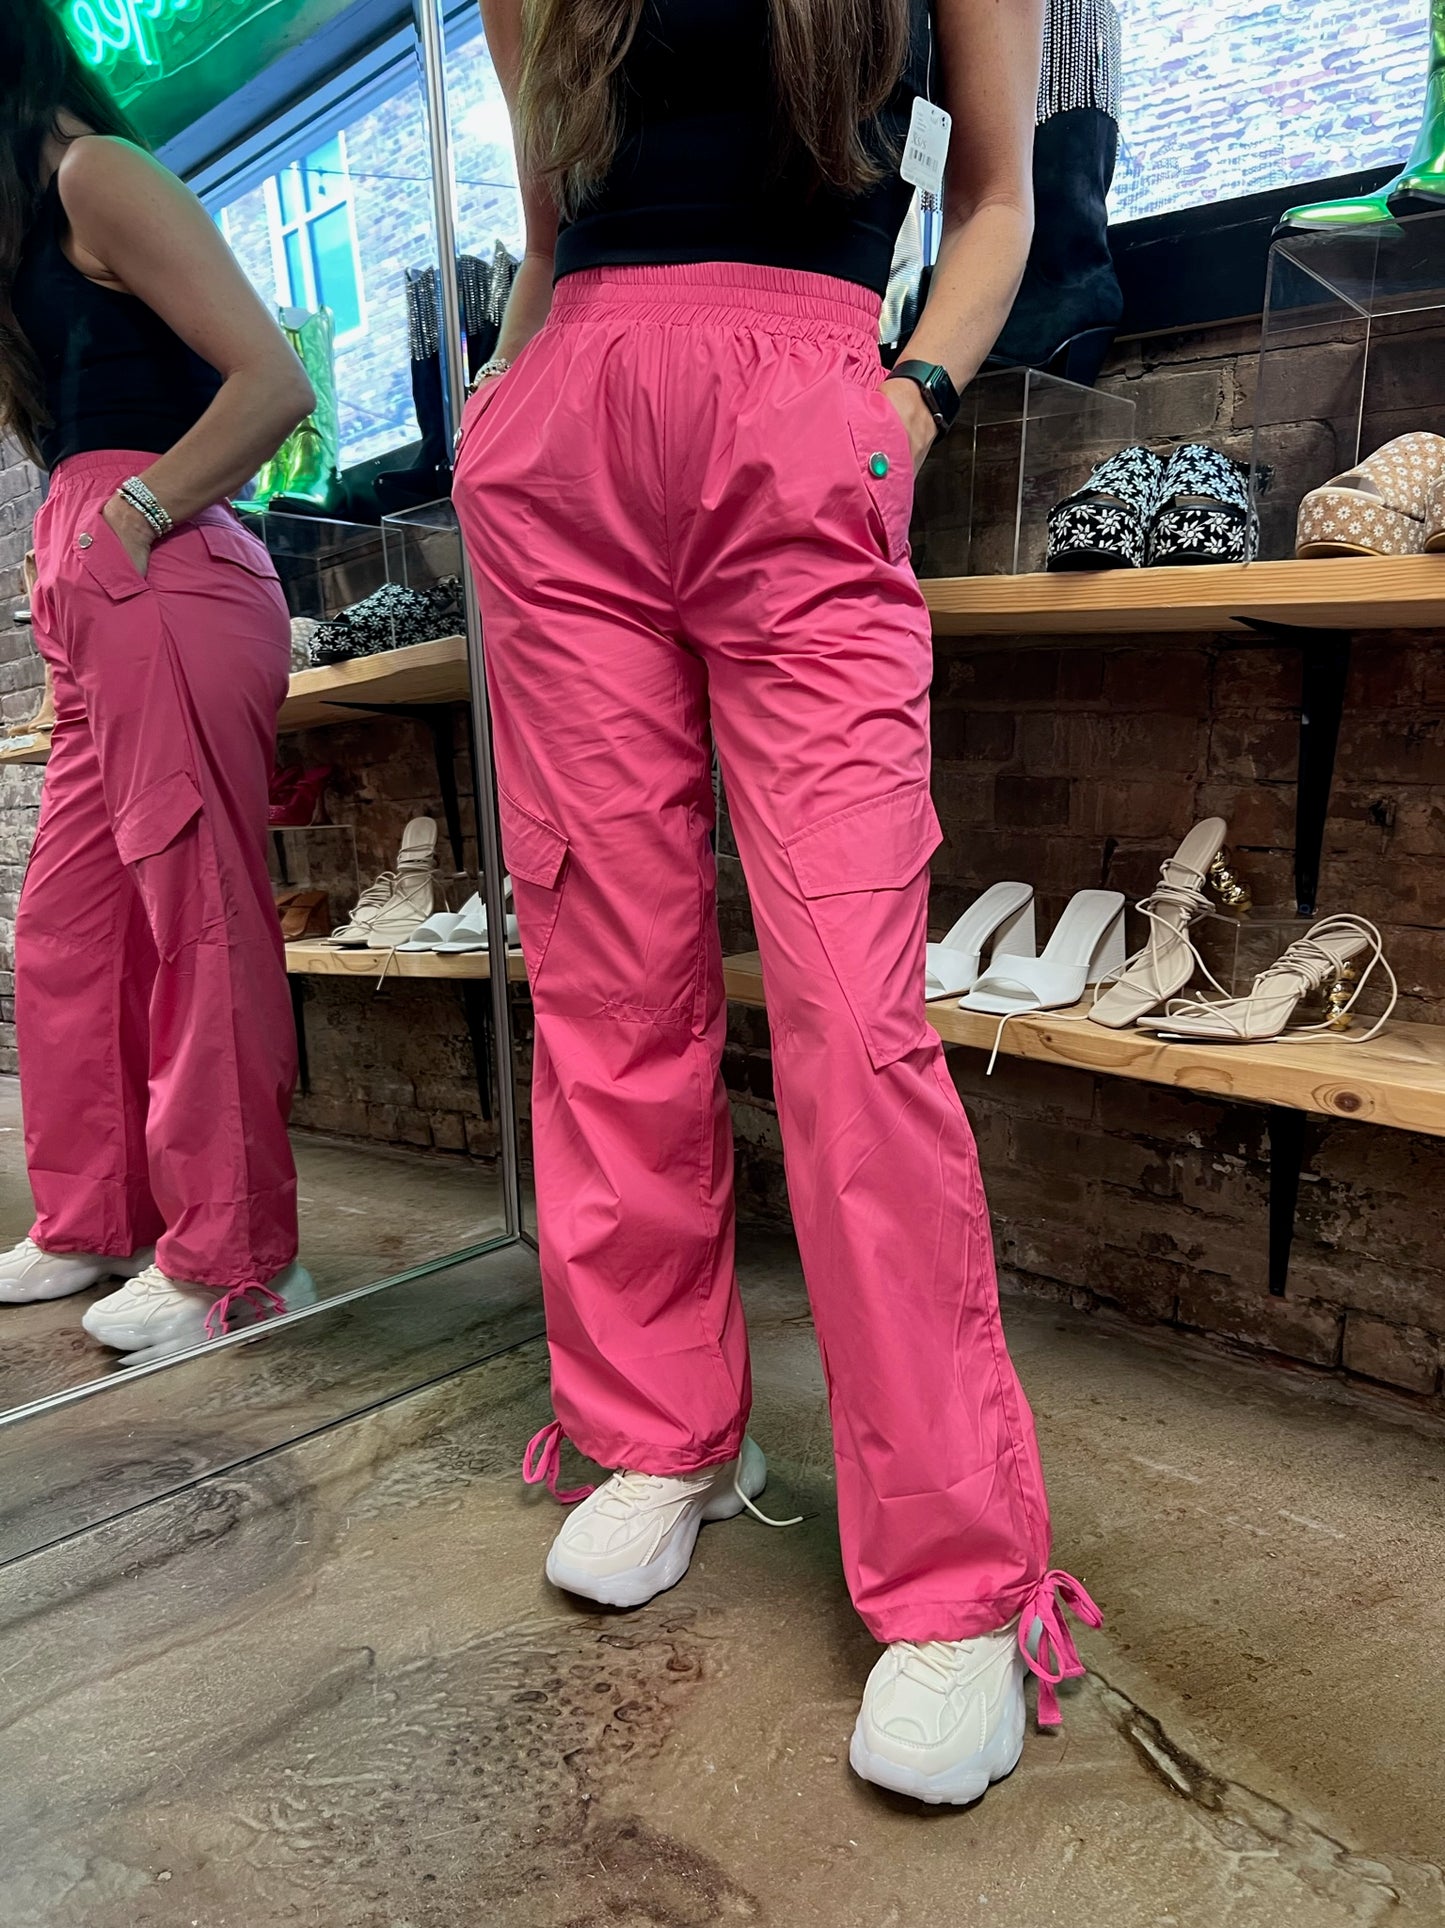 DYNAMIC BLACK / TAN / PINK ATHLEISURE JOGGER - THE HIP EAGLE BOUTIQUE